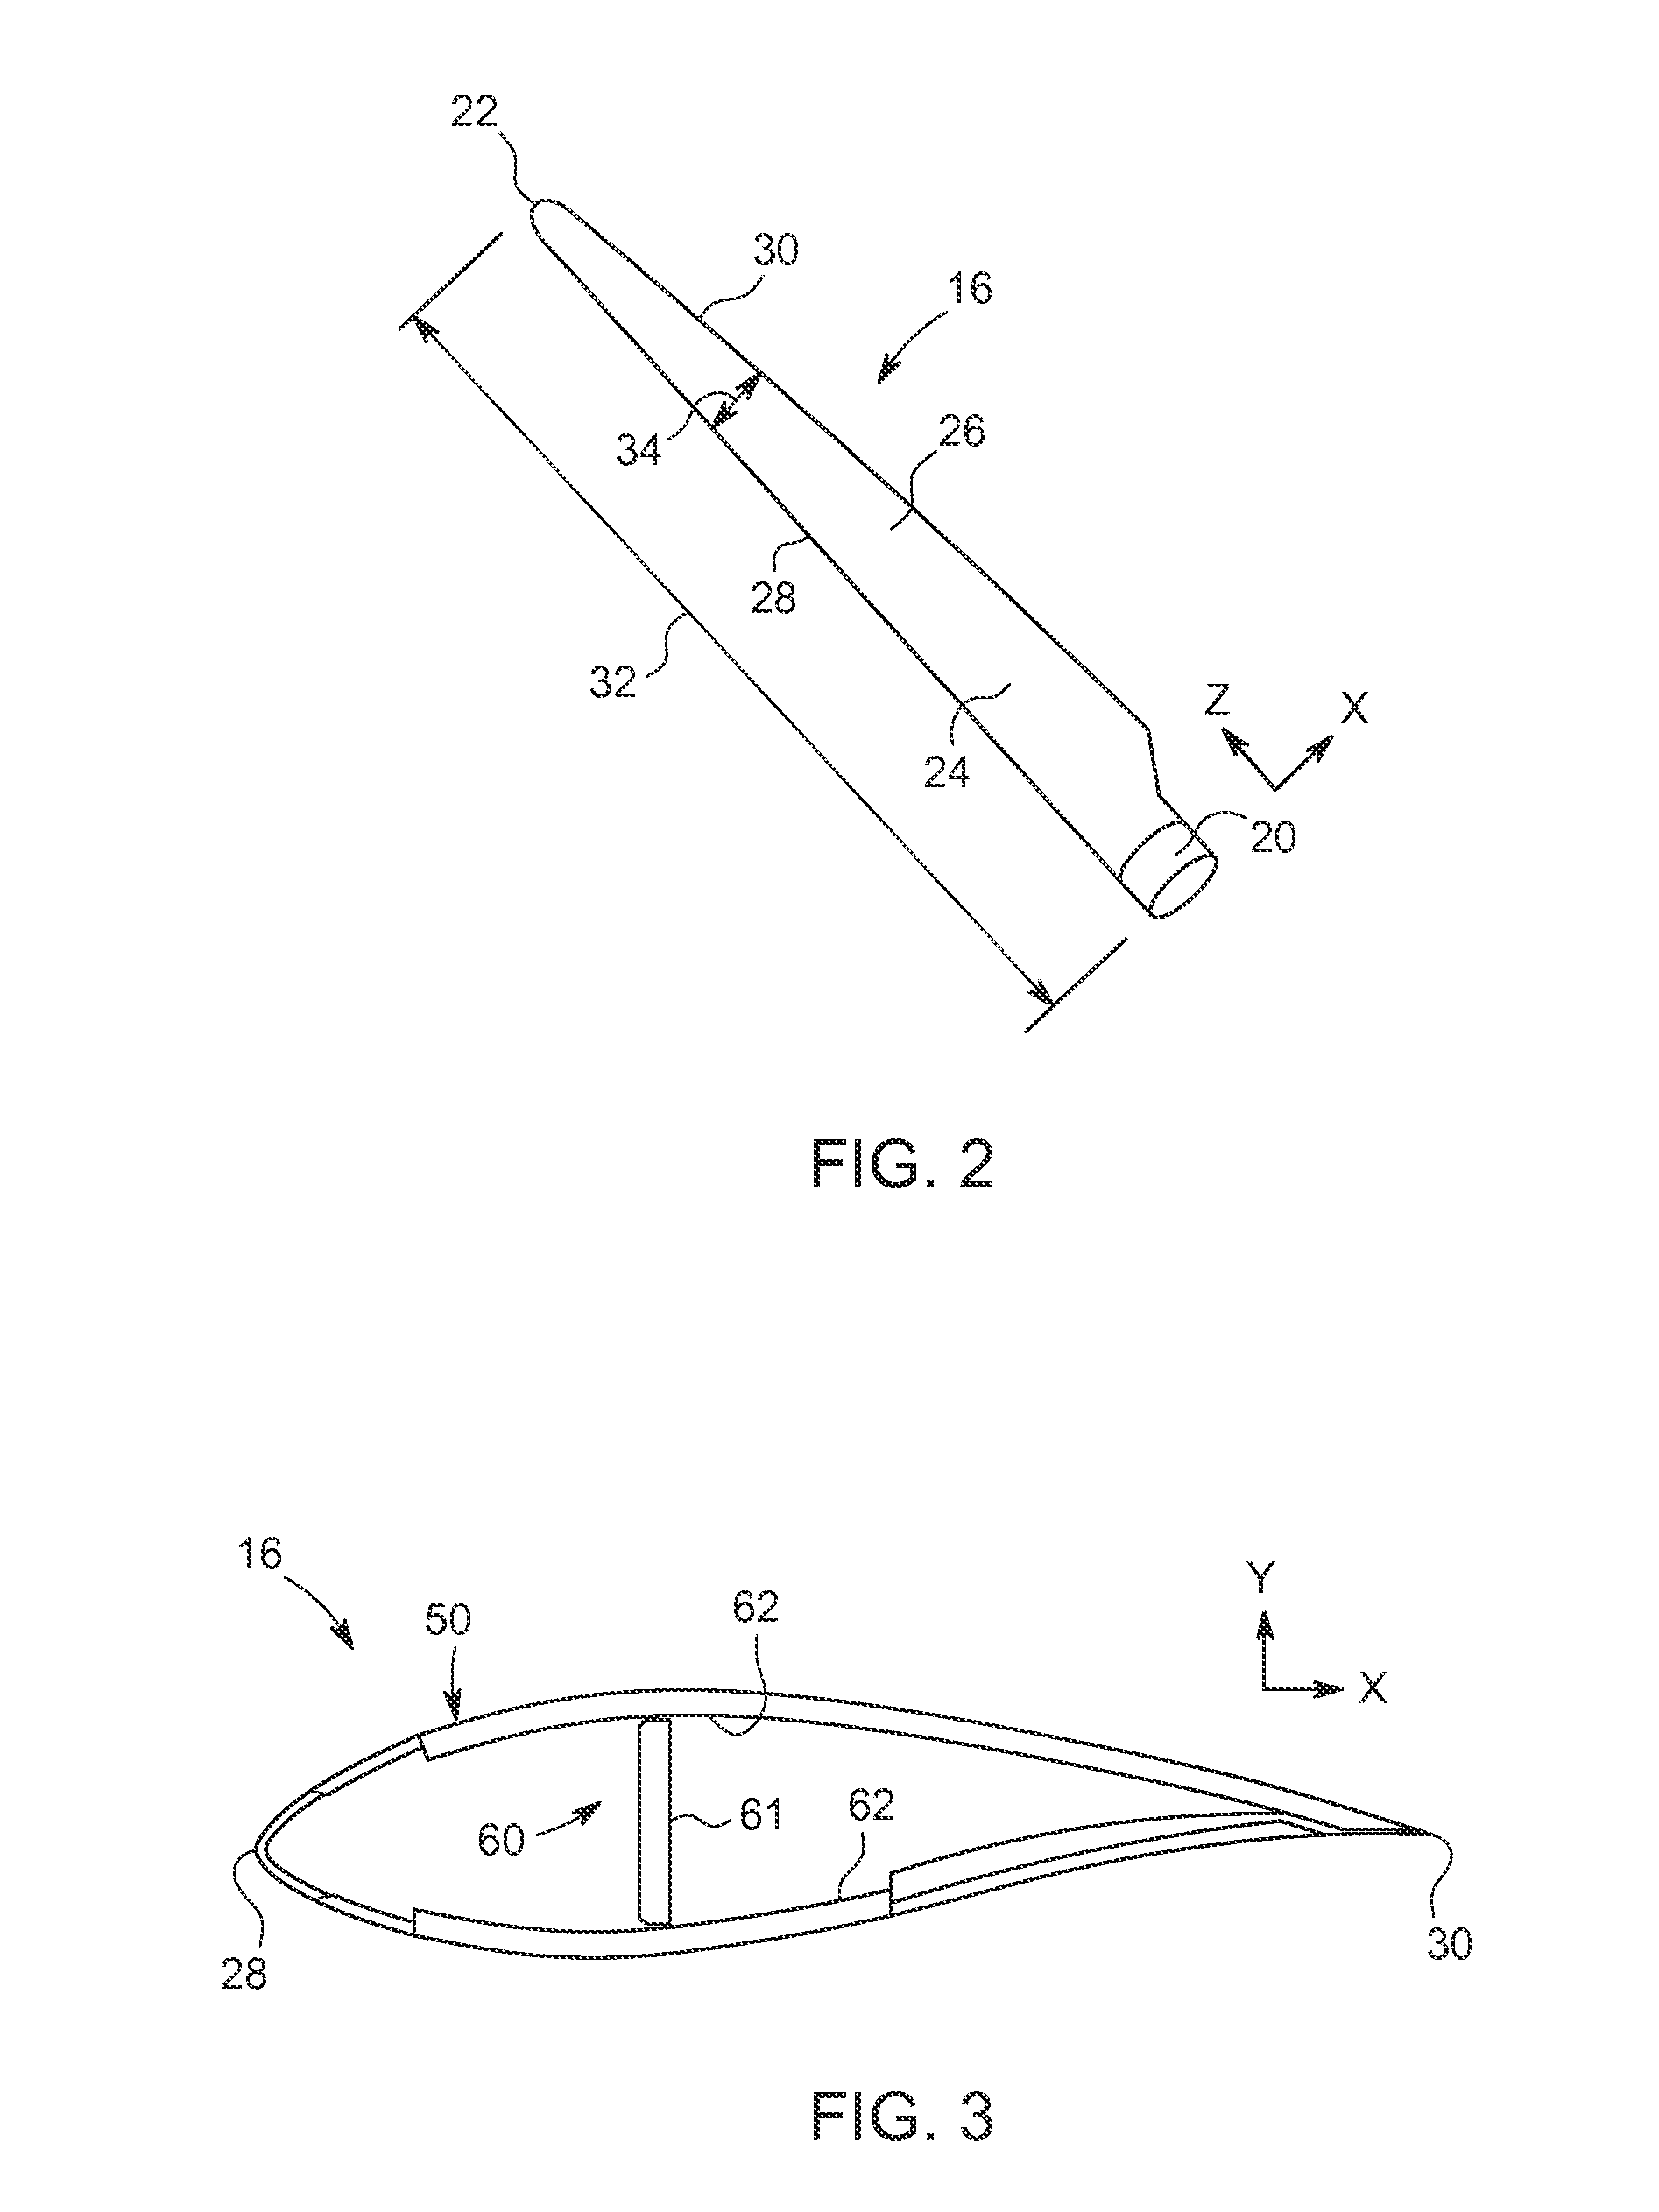 Structural support members with different areal weight fiber reinforcing layers for wind turbine rotor blades